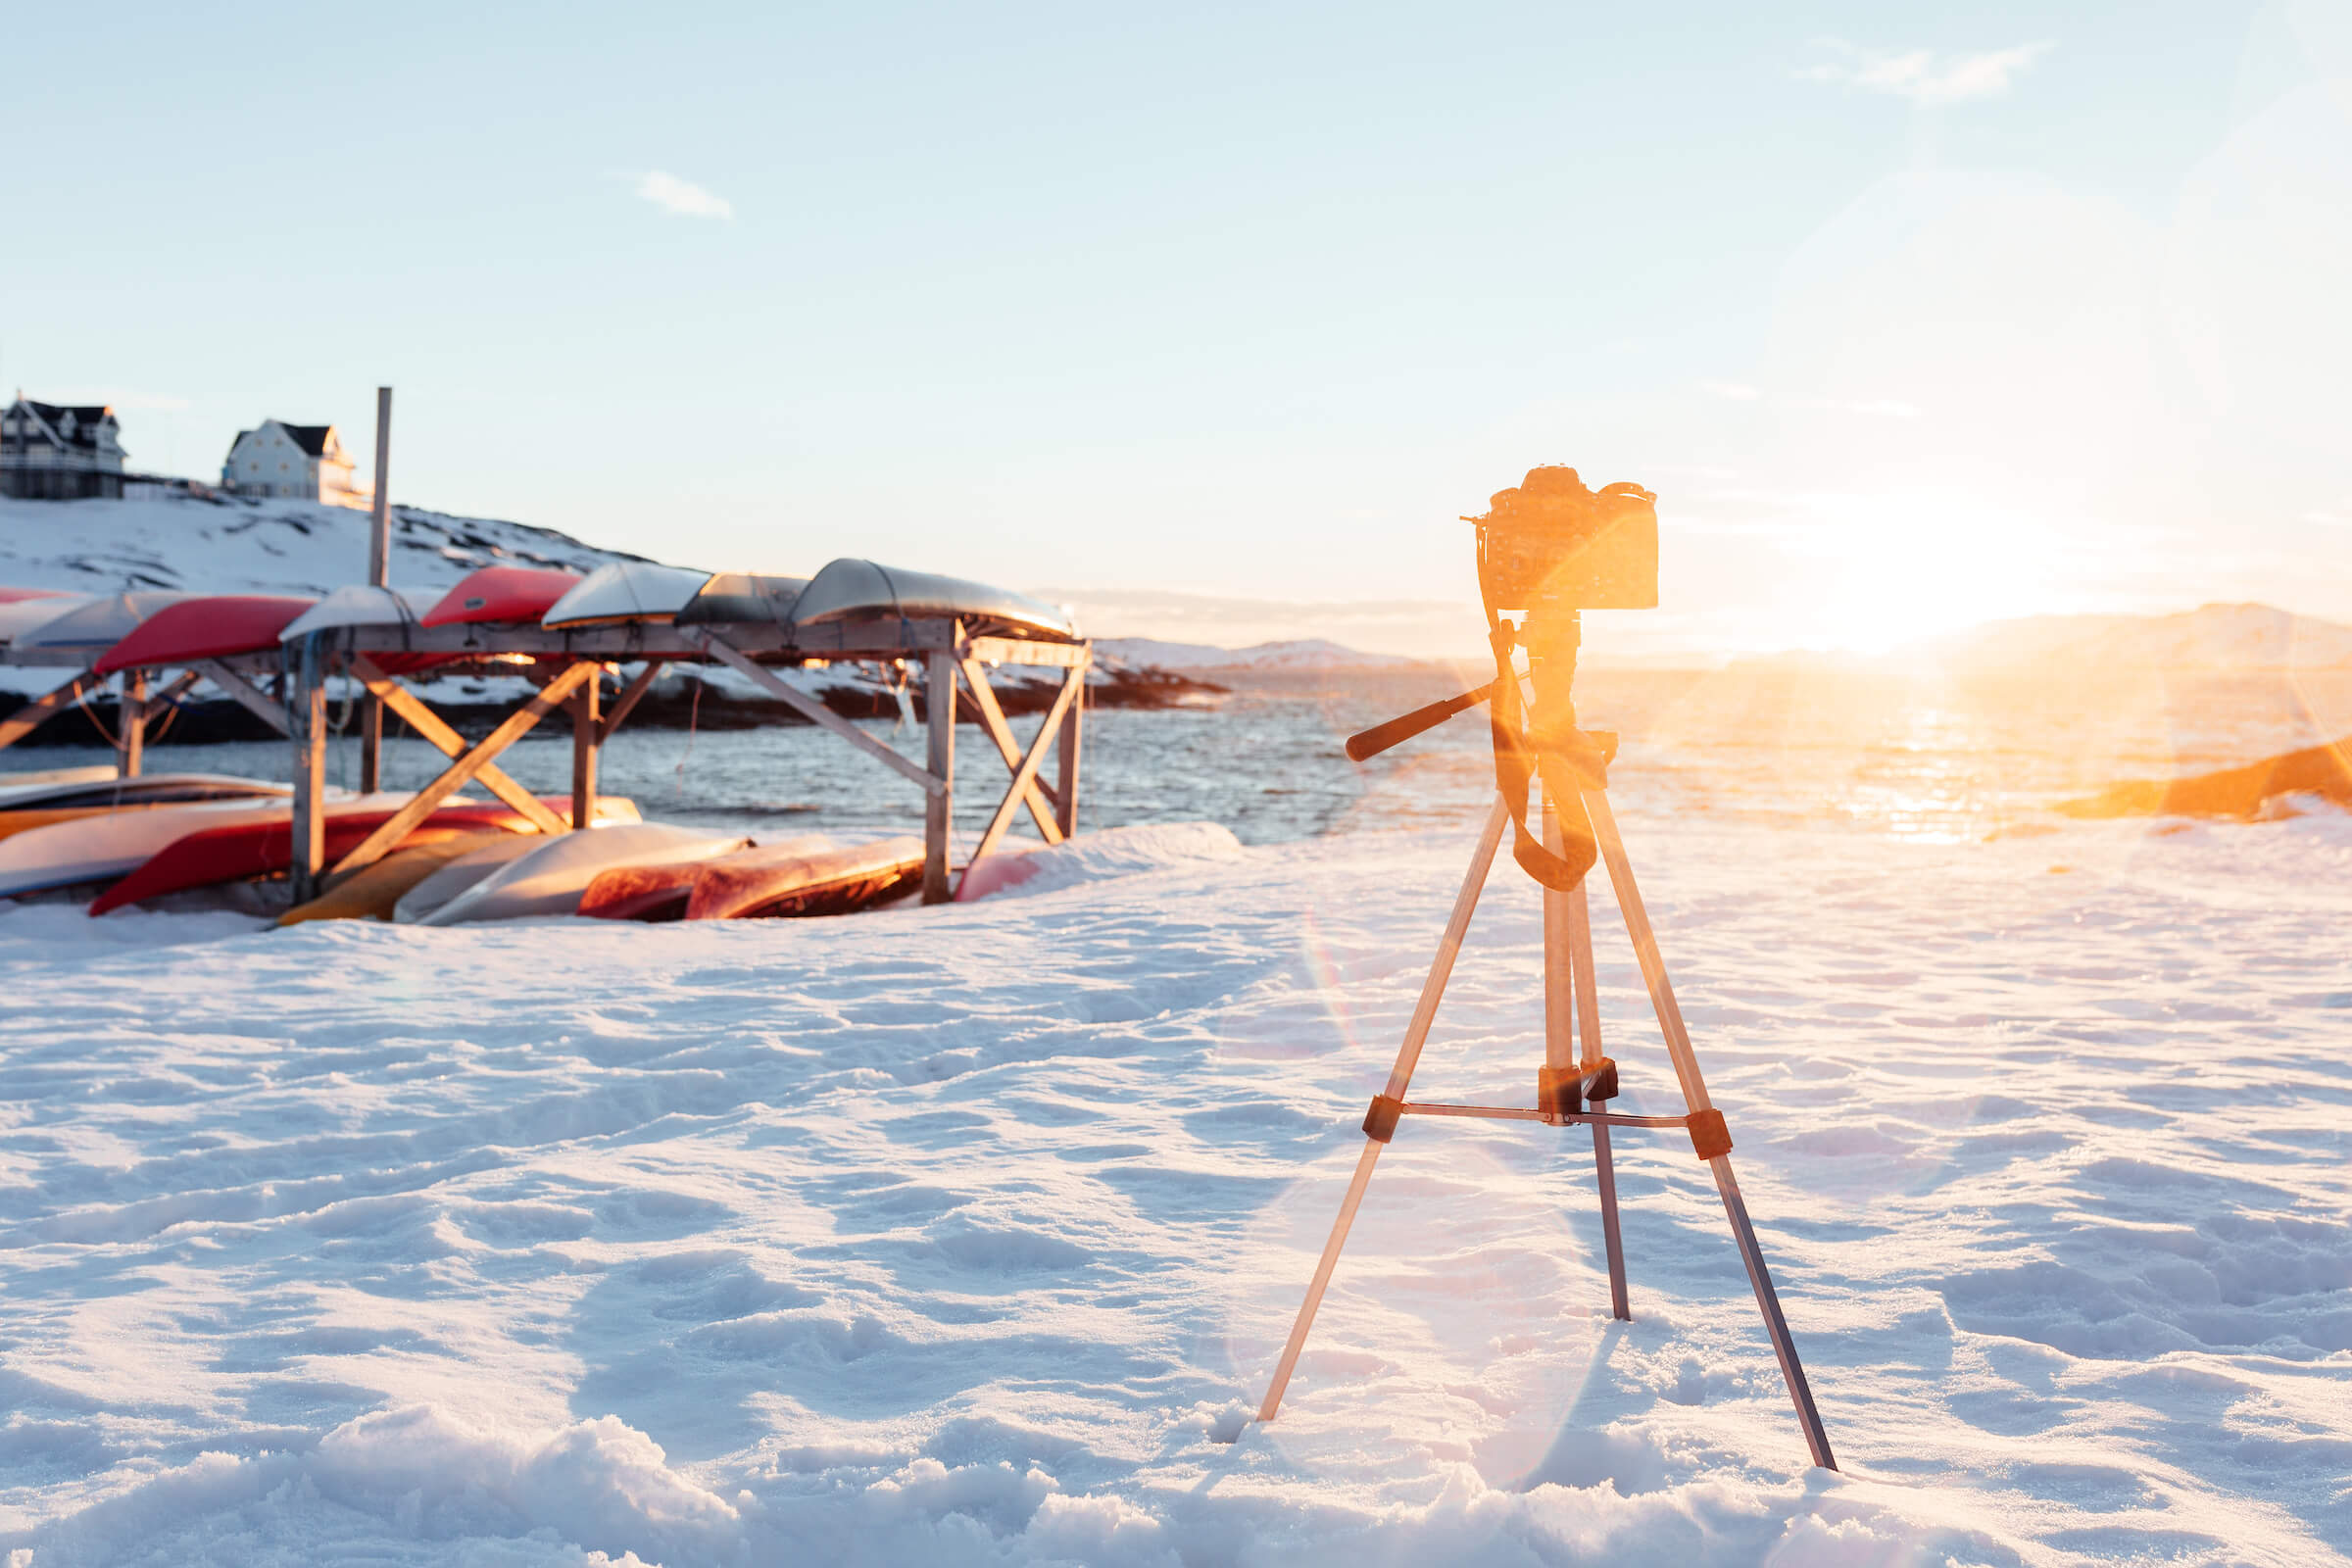 Camera on a tripod taking a timelapse of a sunset in Nuuk in Greenland. Photo by Rebecca Gustafsson